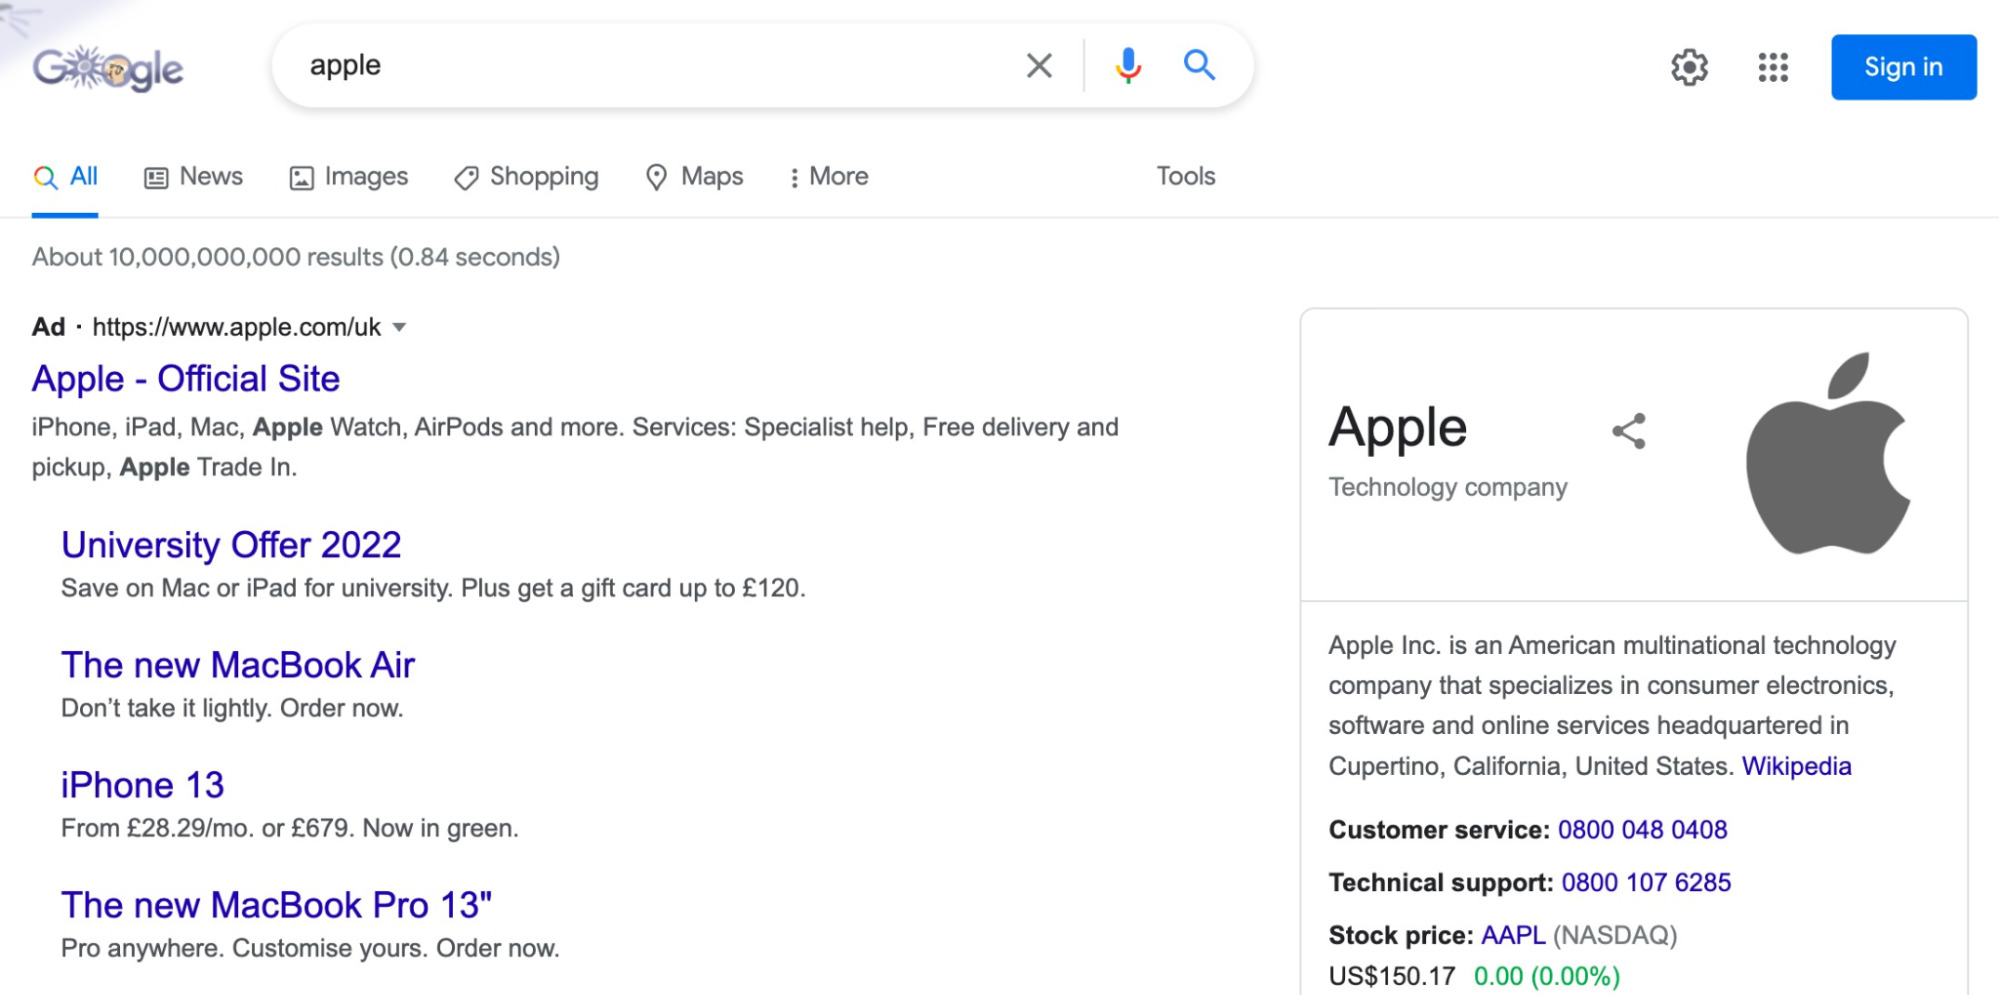 Google SERP for the query, "apple"